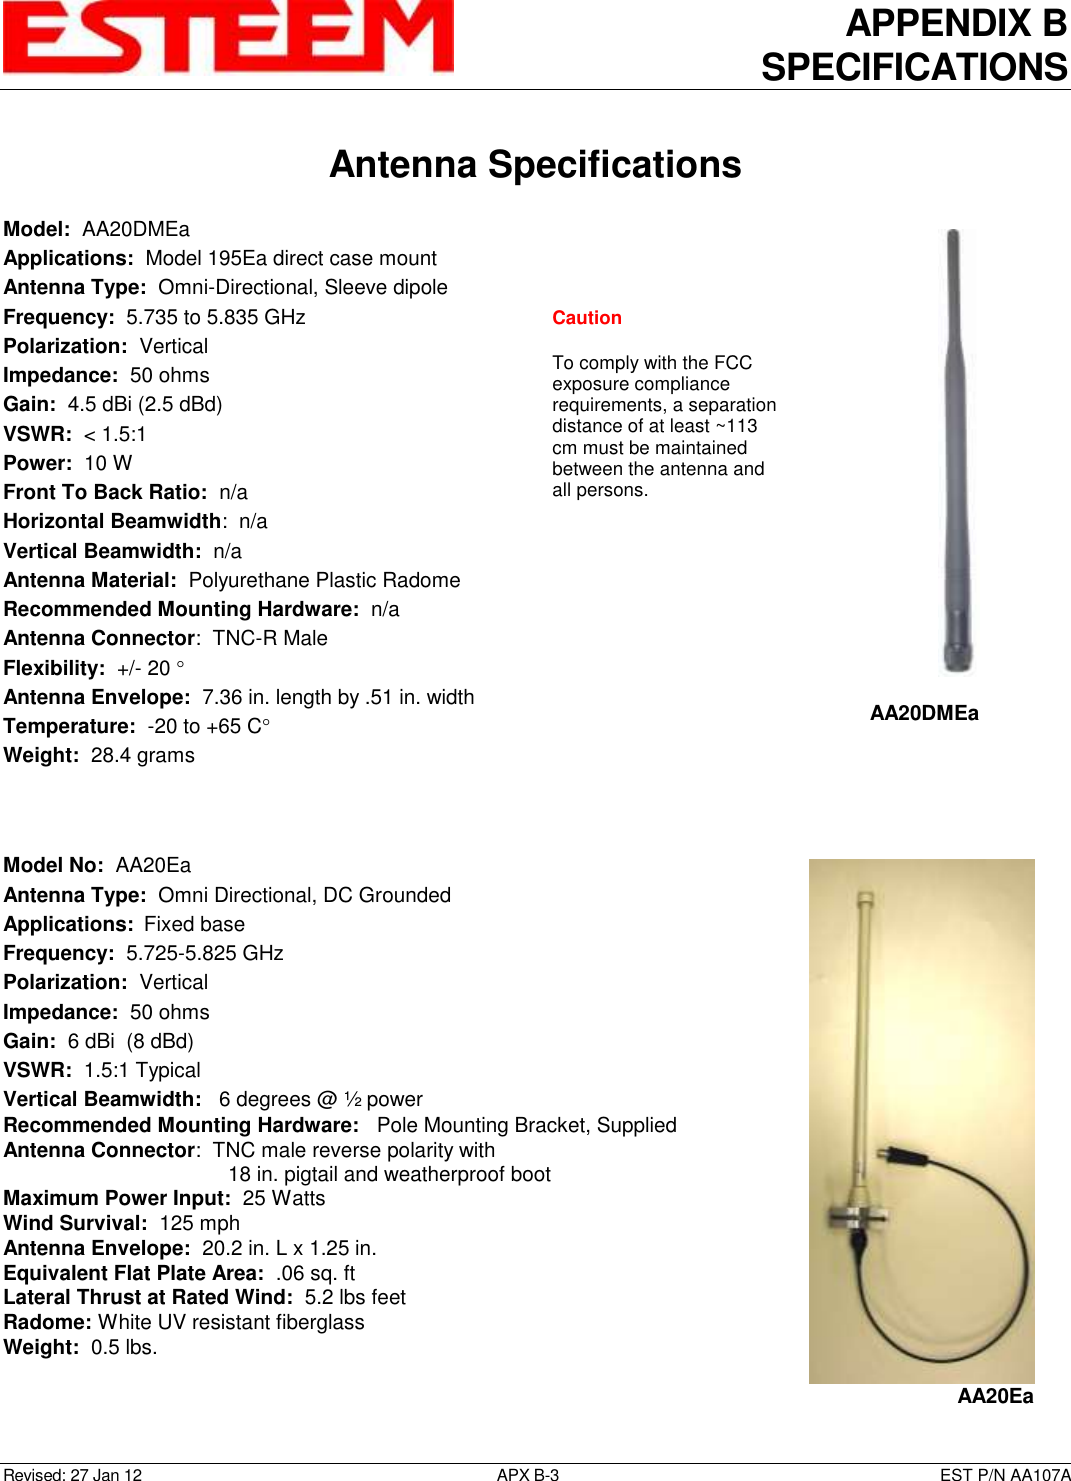 APPENDIX B SPECIFICATIONS   Antenna Specifications  Revised: 27 Jan 12  APX B-3  EST P/N AA107A Model:  AA20DMEa  Applications:  Model 195Ea direct case mount Antenna Type:  Omni-Directional, Sleeve dipole Frequency:  5.735 to 5.835 GHz Polarization:  Vertical Impedance:  50 ohms Gain:  4.5 dBi (2.5 dBd) VSWR:  &lt; 1.5:1  Power:  10 W  Front To Back Ratio:  n/a Horizontal Beamwidth:  n/a Vertical Beamwidth:  n/a Antenna Material:  Polyurethane Plastic Radome  Recommended Mounting Hardware:  n/a Antenna Connector:  TNC-R Male  Flexibility:  +/- 20   Antenna Envelope:  7.36 in. length by .51 in. width Temperature:  -20 to +65 C  Weight:  28.4 grams    Model No:  AA20Ea Antenna Type:  Omni Directional, DC Grounded Applications:  Fixed base Frequency:  5.725-5.825 GHz  Polarization:  Vertical Impedance:  50 ohms Gain:  6 dBi  (8 dBd) VSWR:  1.5:1 Typical  Vertical Beamwidth:   6 degrees @ ½ power Recommended Mounting Hardware:   Pole Mounting Bracket, Supplied Antenna Connector:  TNC male reverse polarity with  18 in. pigtail and weatherproof boot Maximum Power Input:  25 Watts Wind Survival:  125 mph Antenna Envelope:  20.2 in. L x 1.25 in. Equivalent Flat Plate Area:  .06 sq. ft Lateral Thrust at Rated Wind:  5.2 lbs feet Radome: White UV resistant fiberglass Weight:  0.5 lbs.    AA20DMEa  AA20Ea Caution  To comply with the FCC exposure compliance requirements, a separation distance of at least ~113 cm must be maintained between the antenna and all persons.  